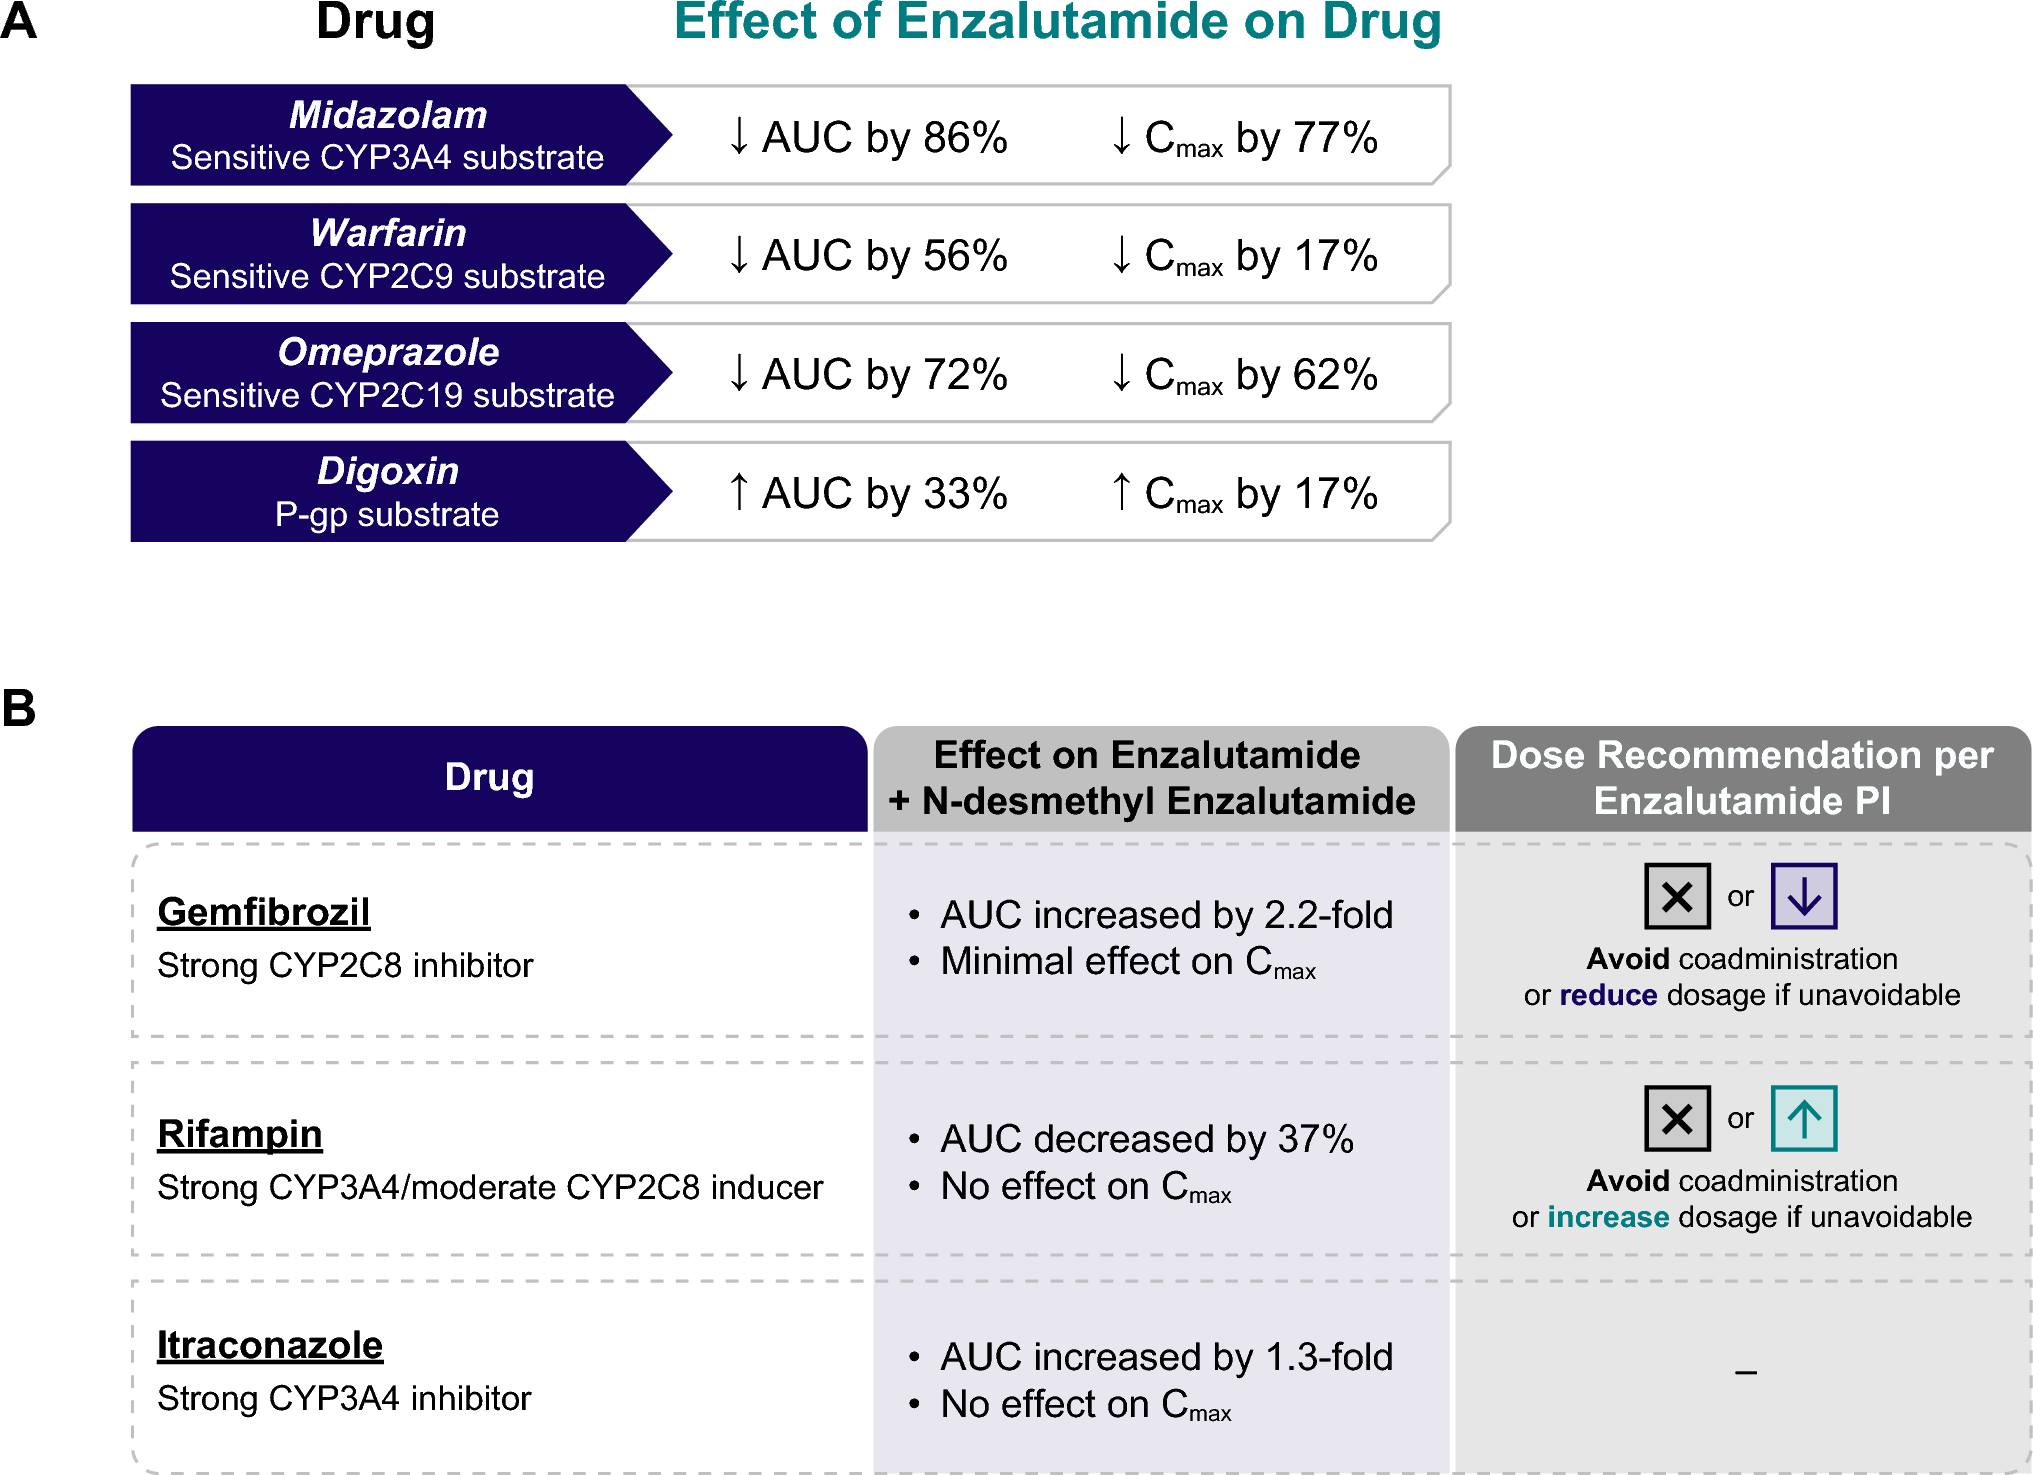 Enzalutamide: Understanding and Managing Drug Interactions to Improve Patient Safety and Drug Efficacy